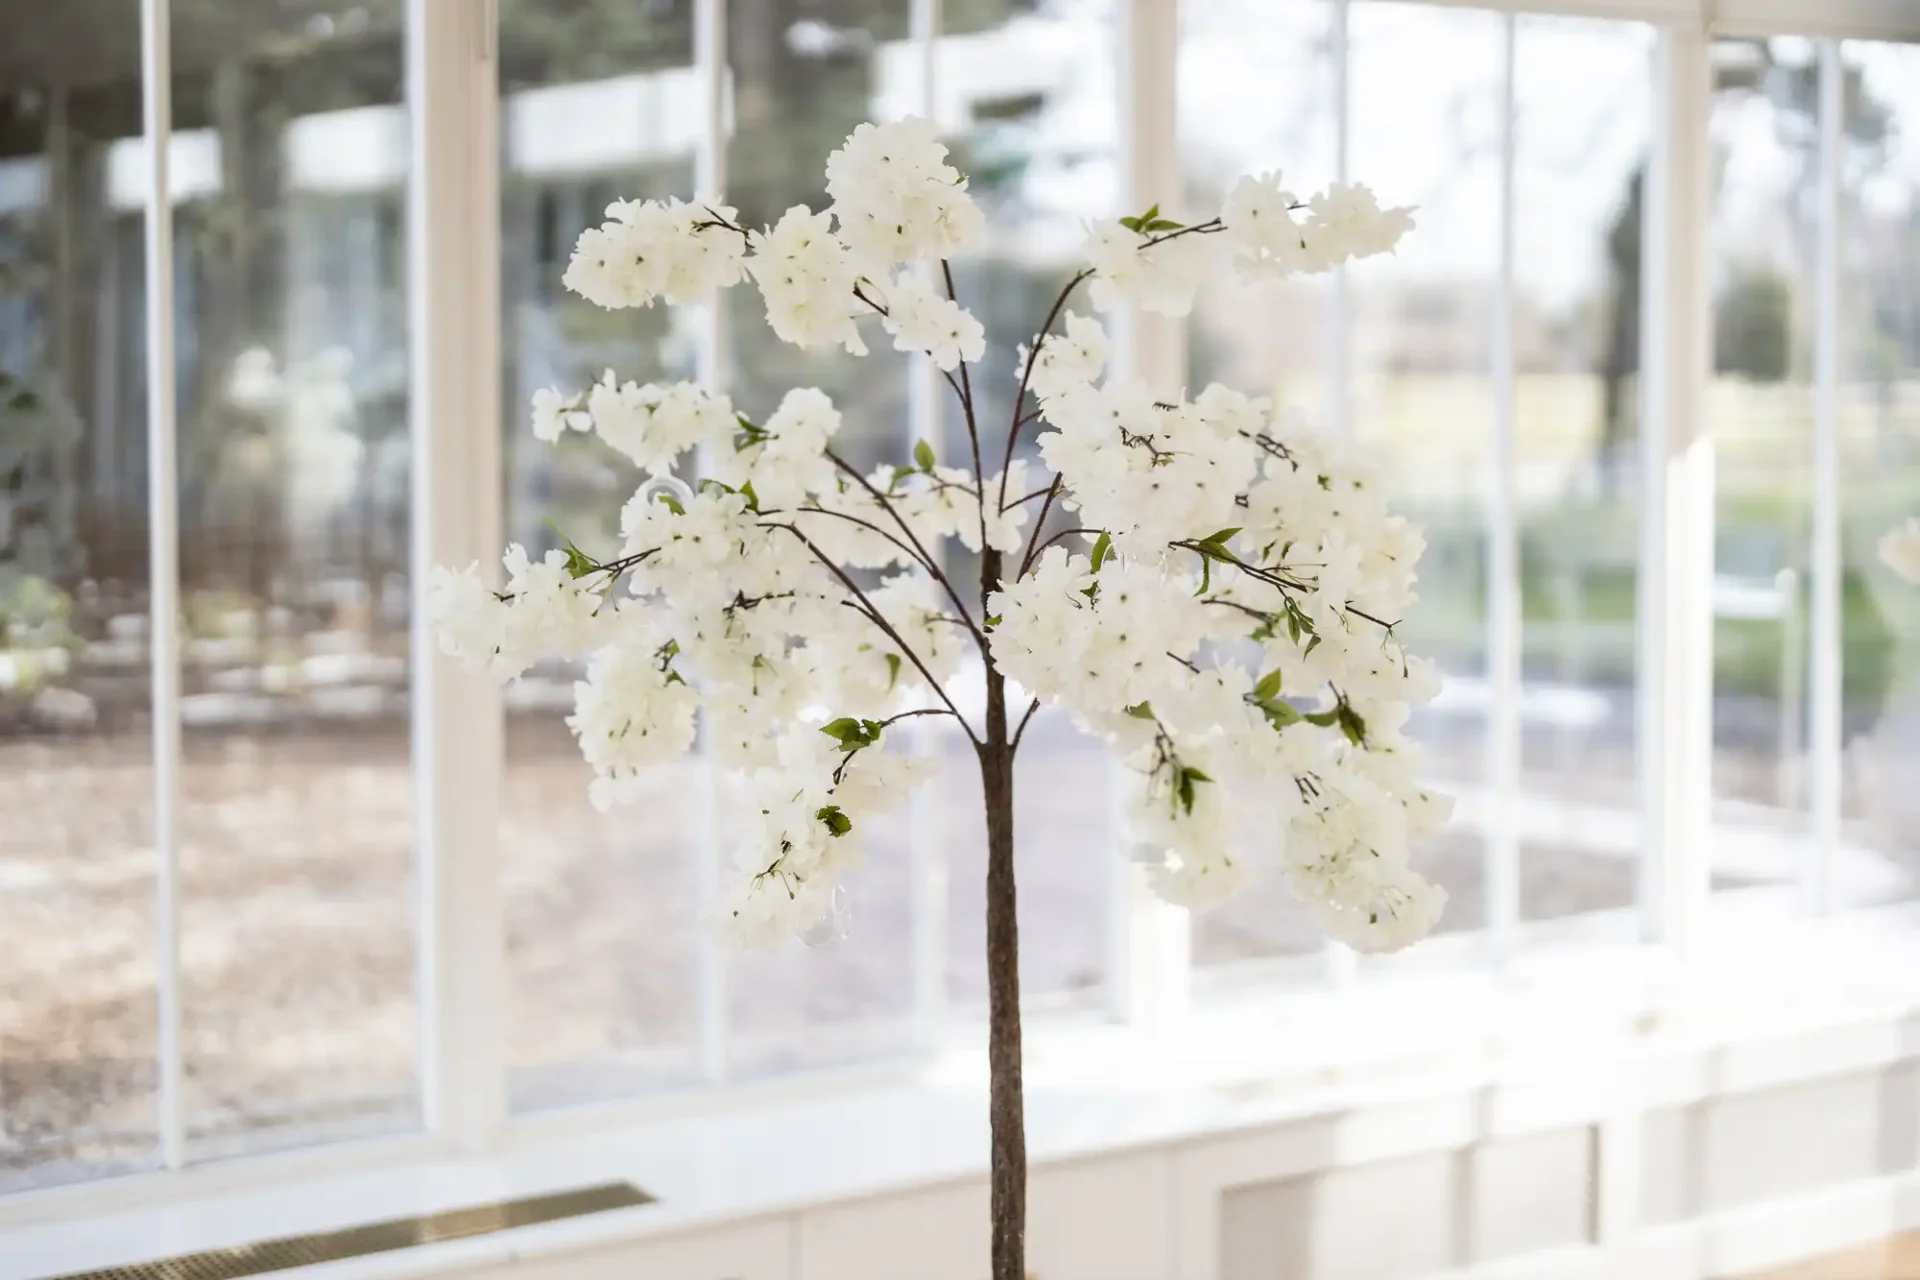 A branch with white cherry blossoms in a vase, placed in front of sunlit windows in a bright, airy room.